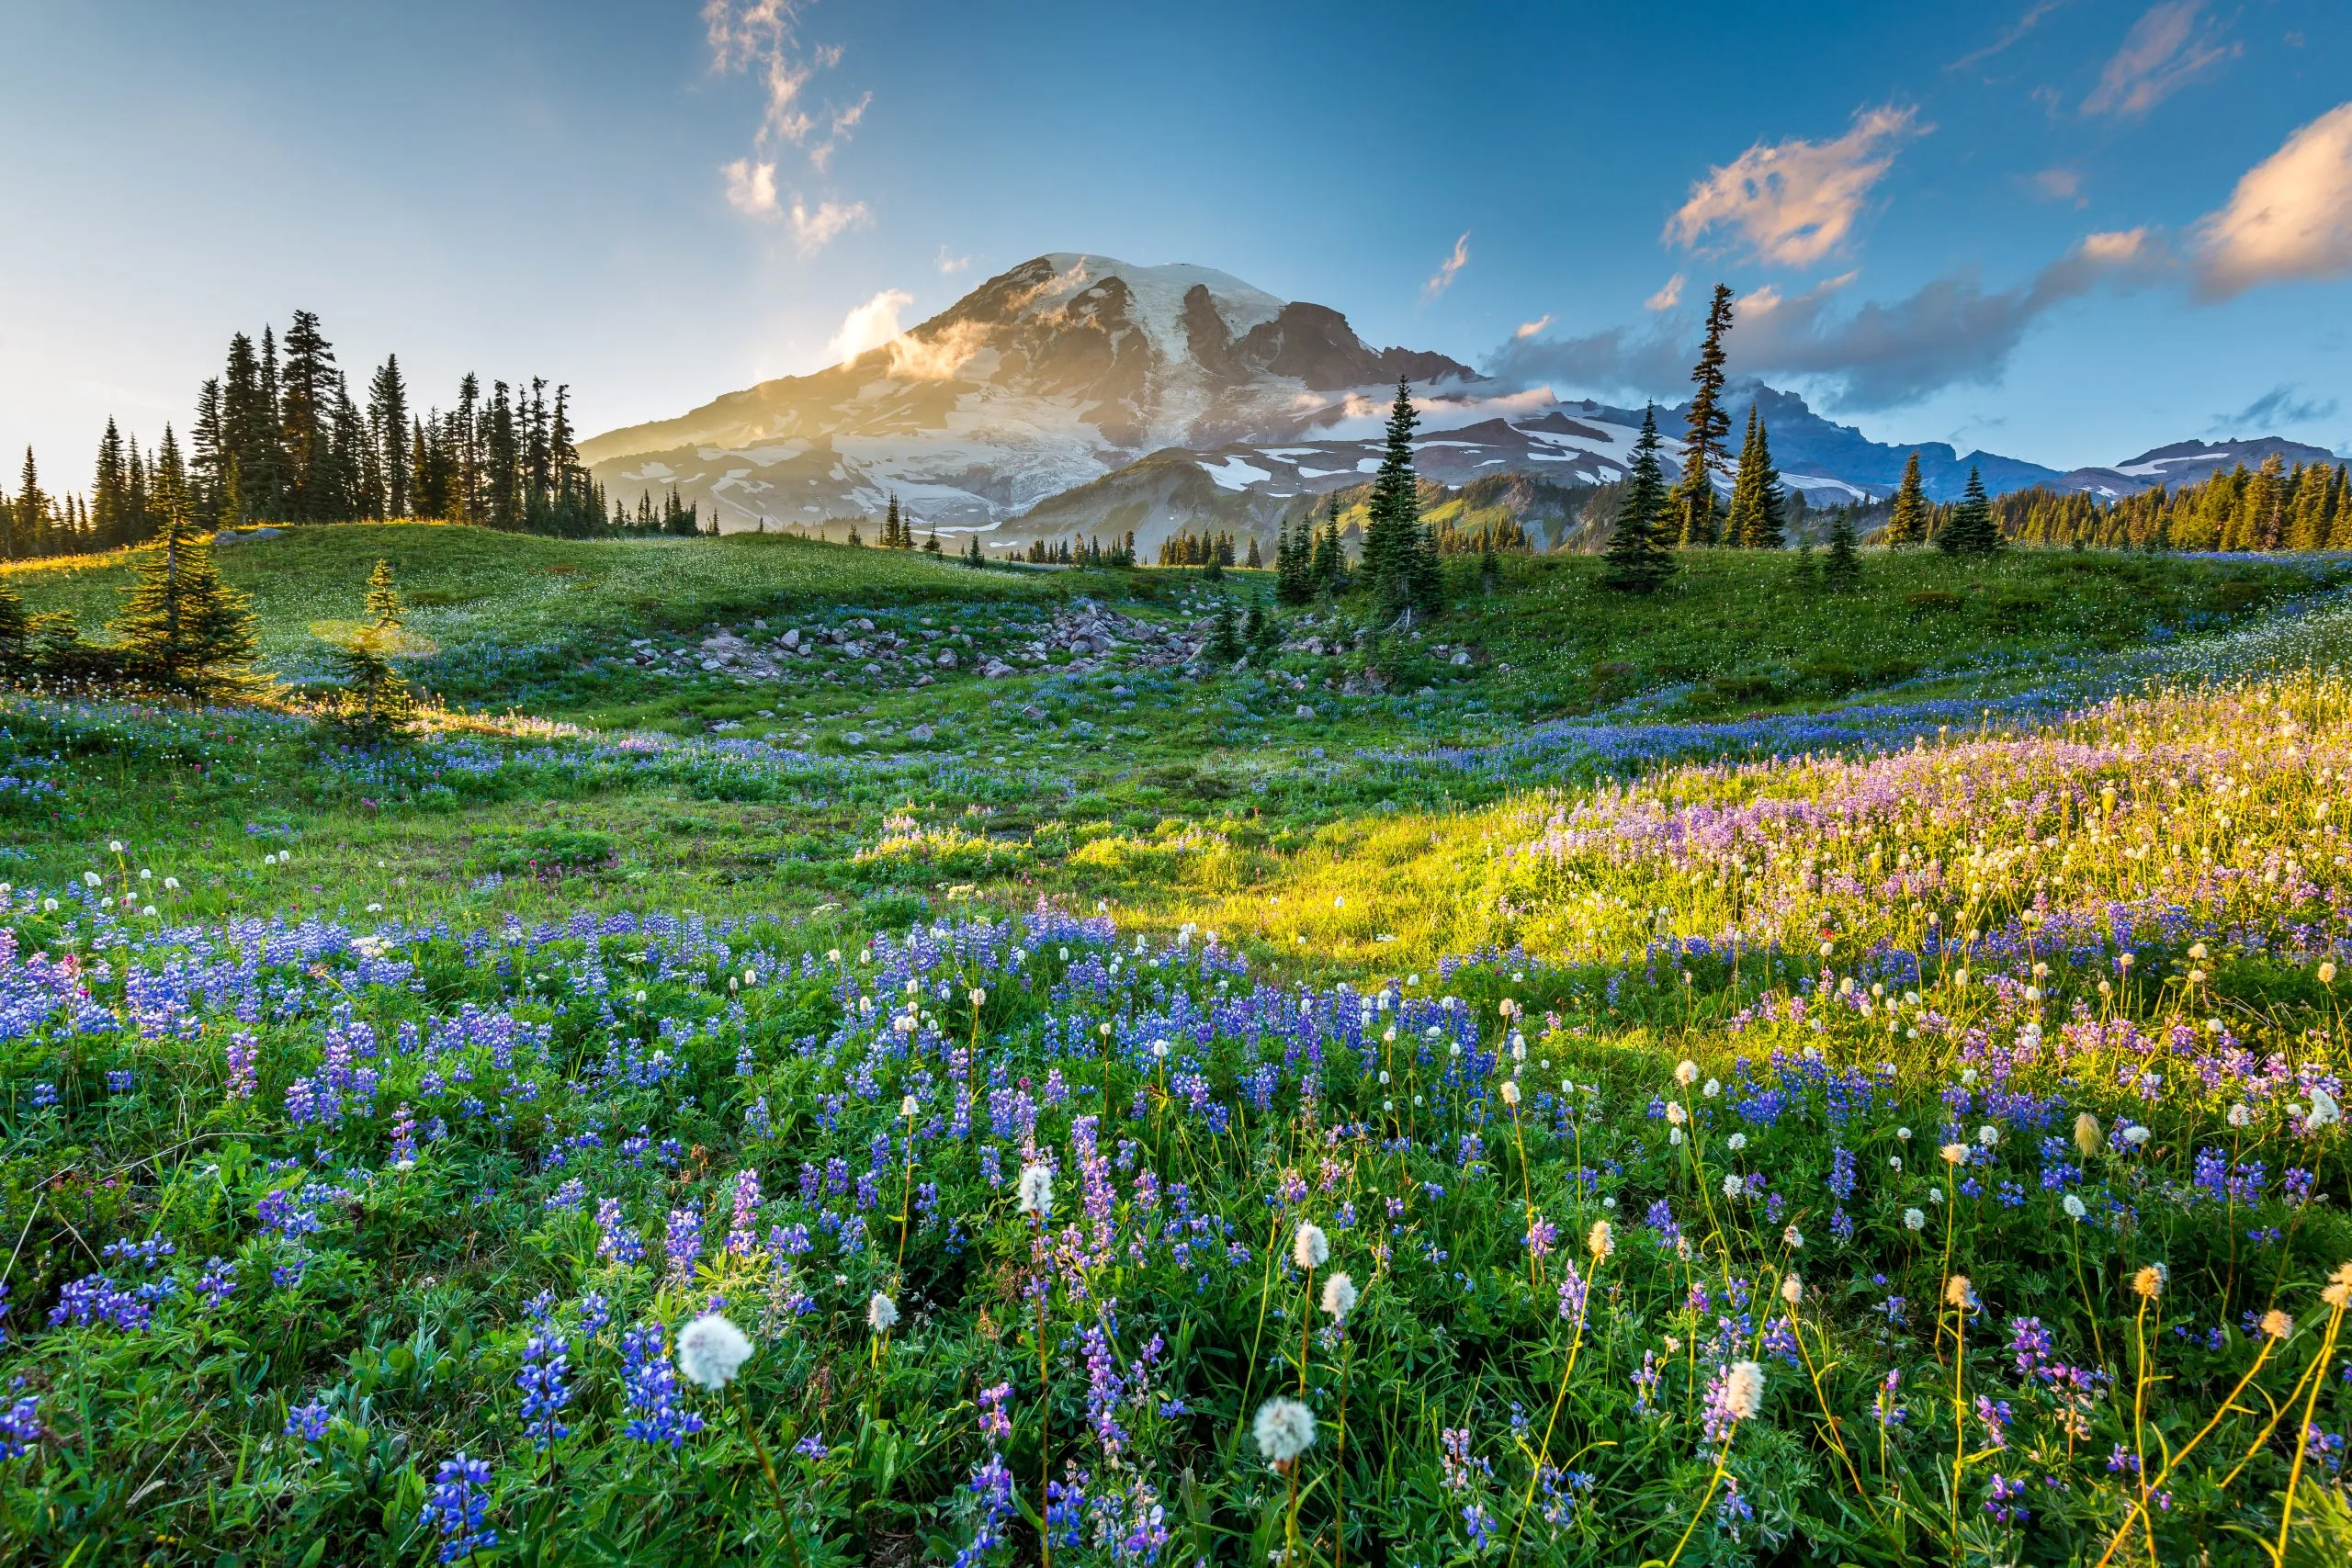 mount rainier national park, one of the most beautiful national parks in the united states, with wildflowers in the foreground and mount rainier in the background